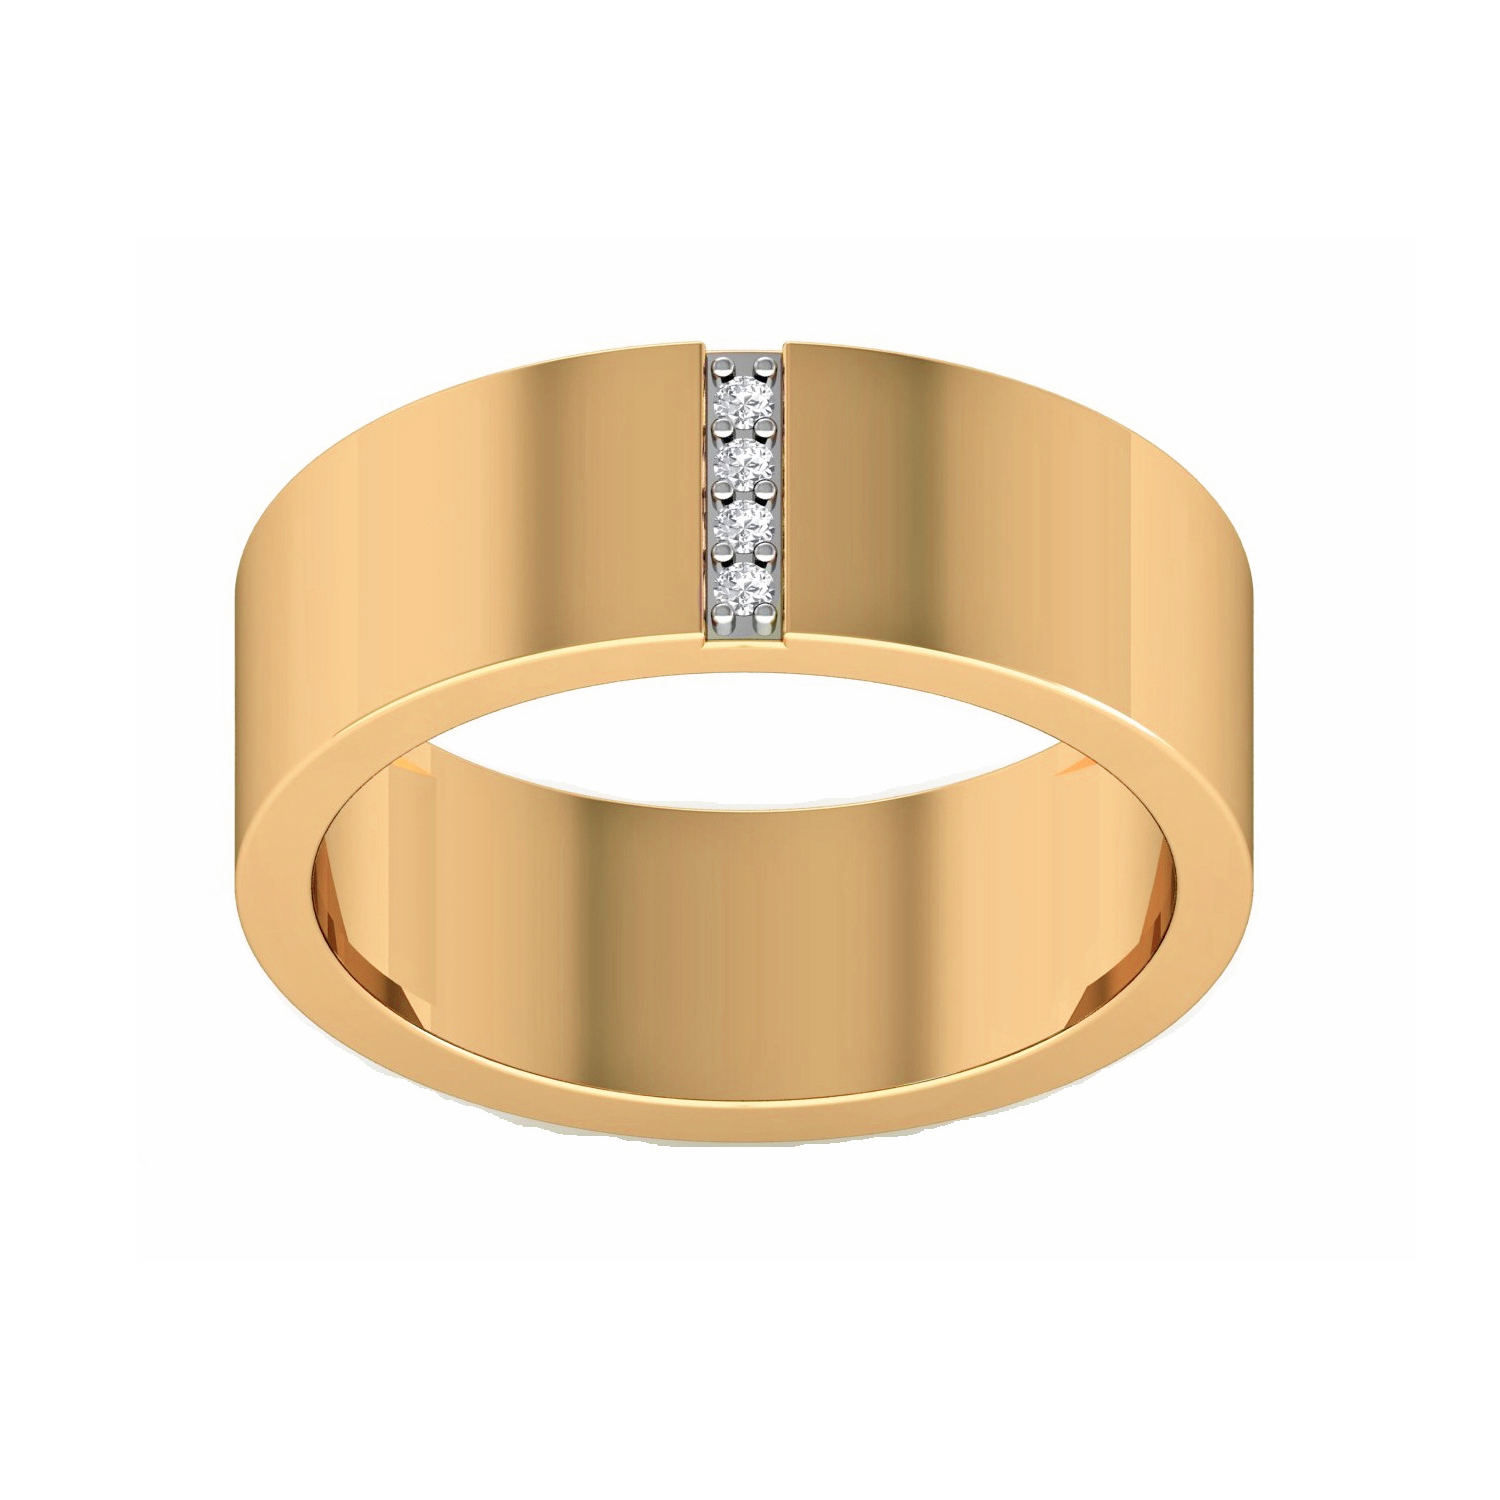 Solid Gold Certified Diamond Mens Band Ring